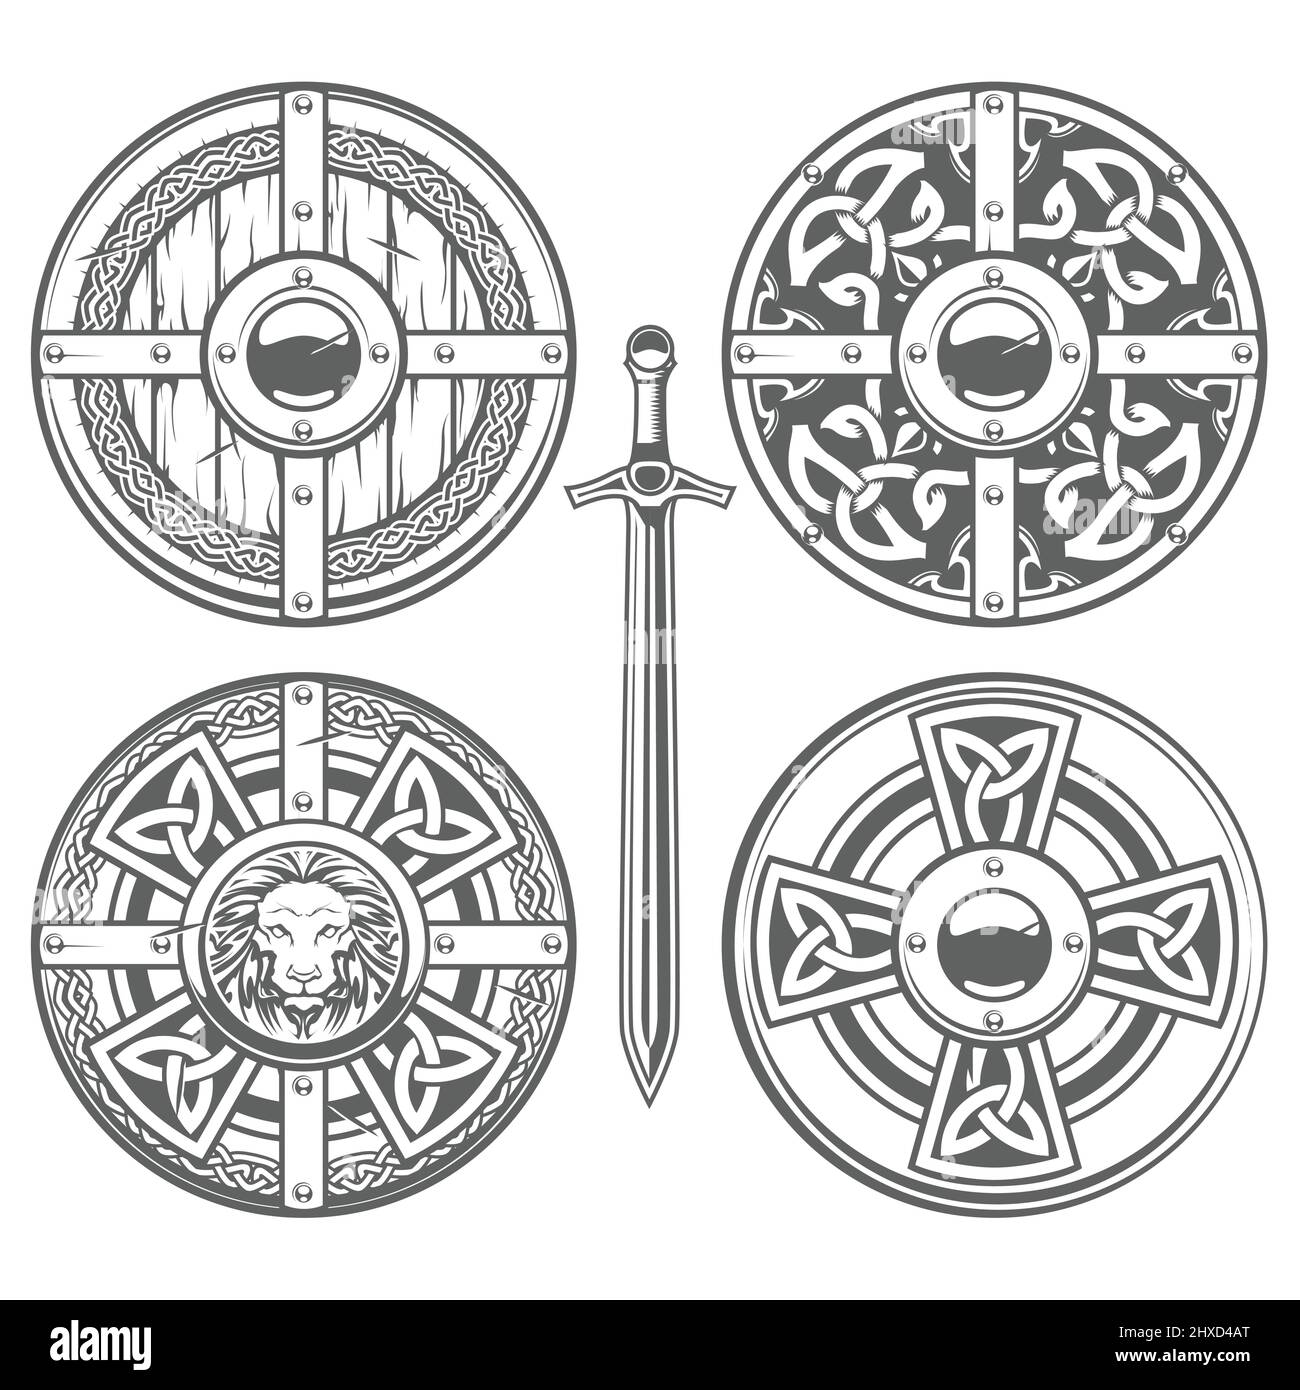 Set of round shields with celtic pattern and medieval ornaments, knight armor, chivalry shields, vector Stock Vector